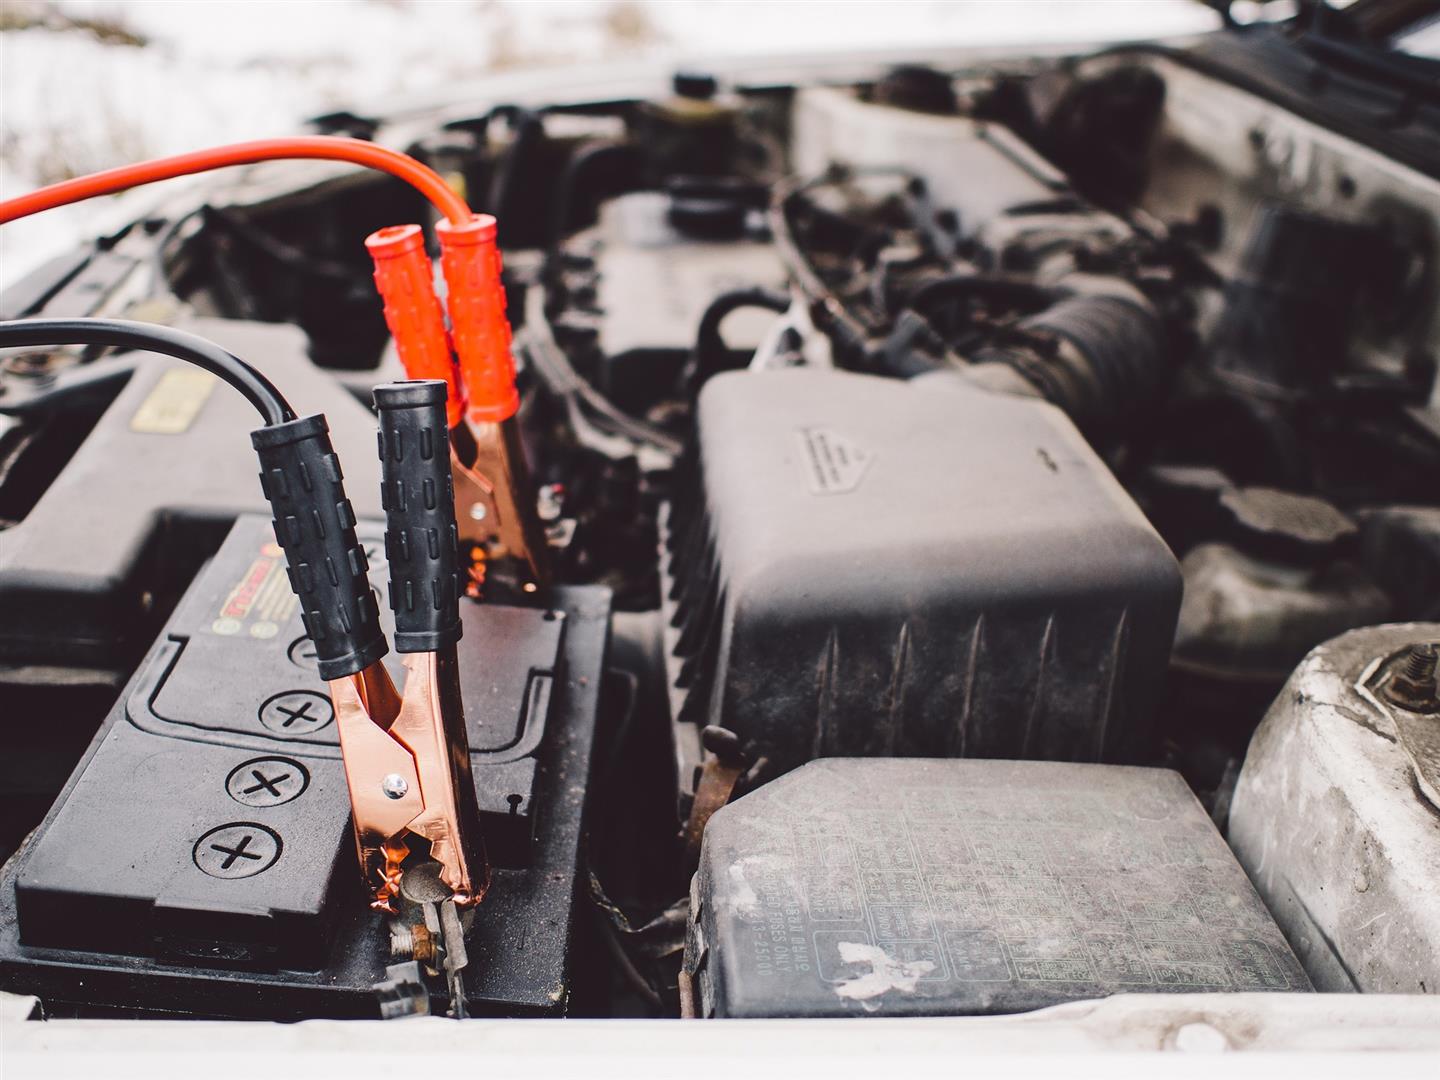 How to safely boost a dead battery